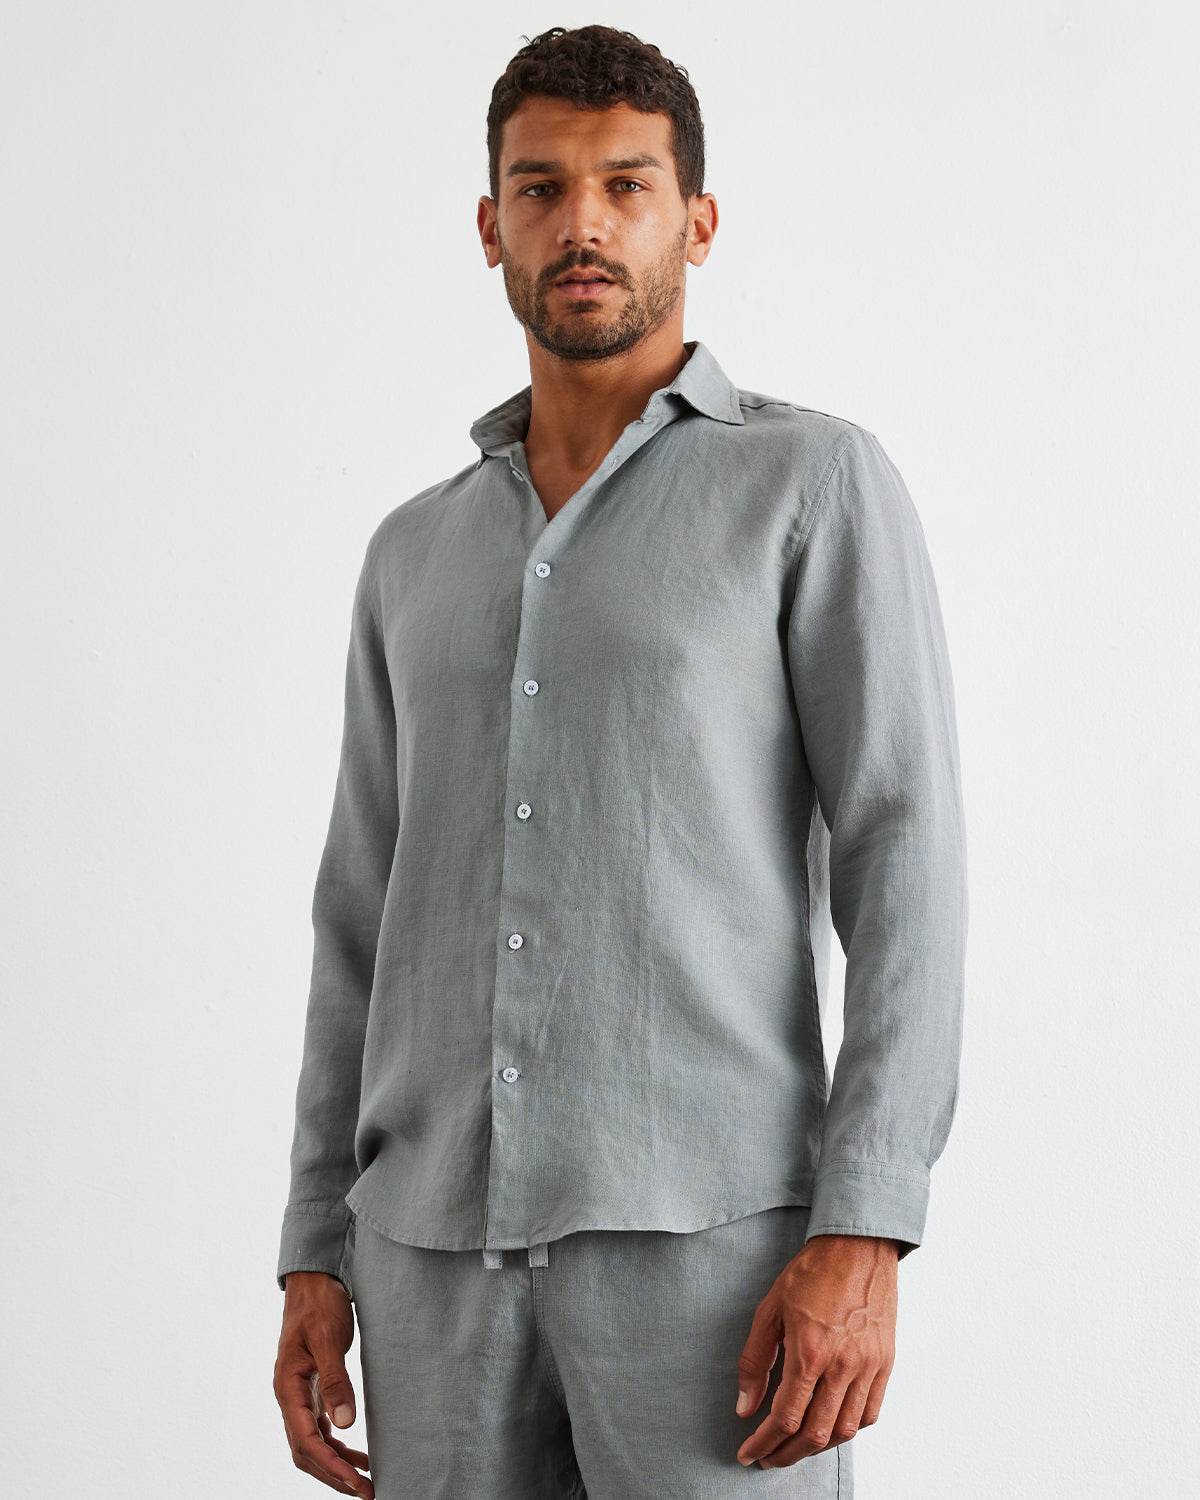 Mineral 100% French Flax Linen Men's Long Sleeve Shirt – Bed Threads